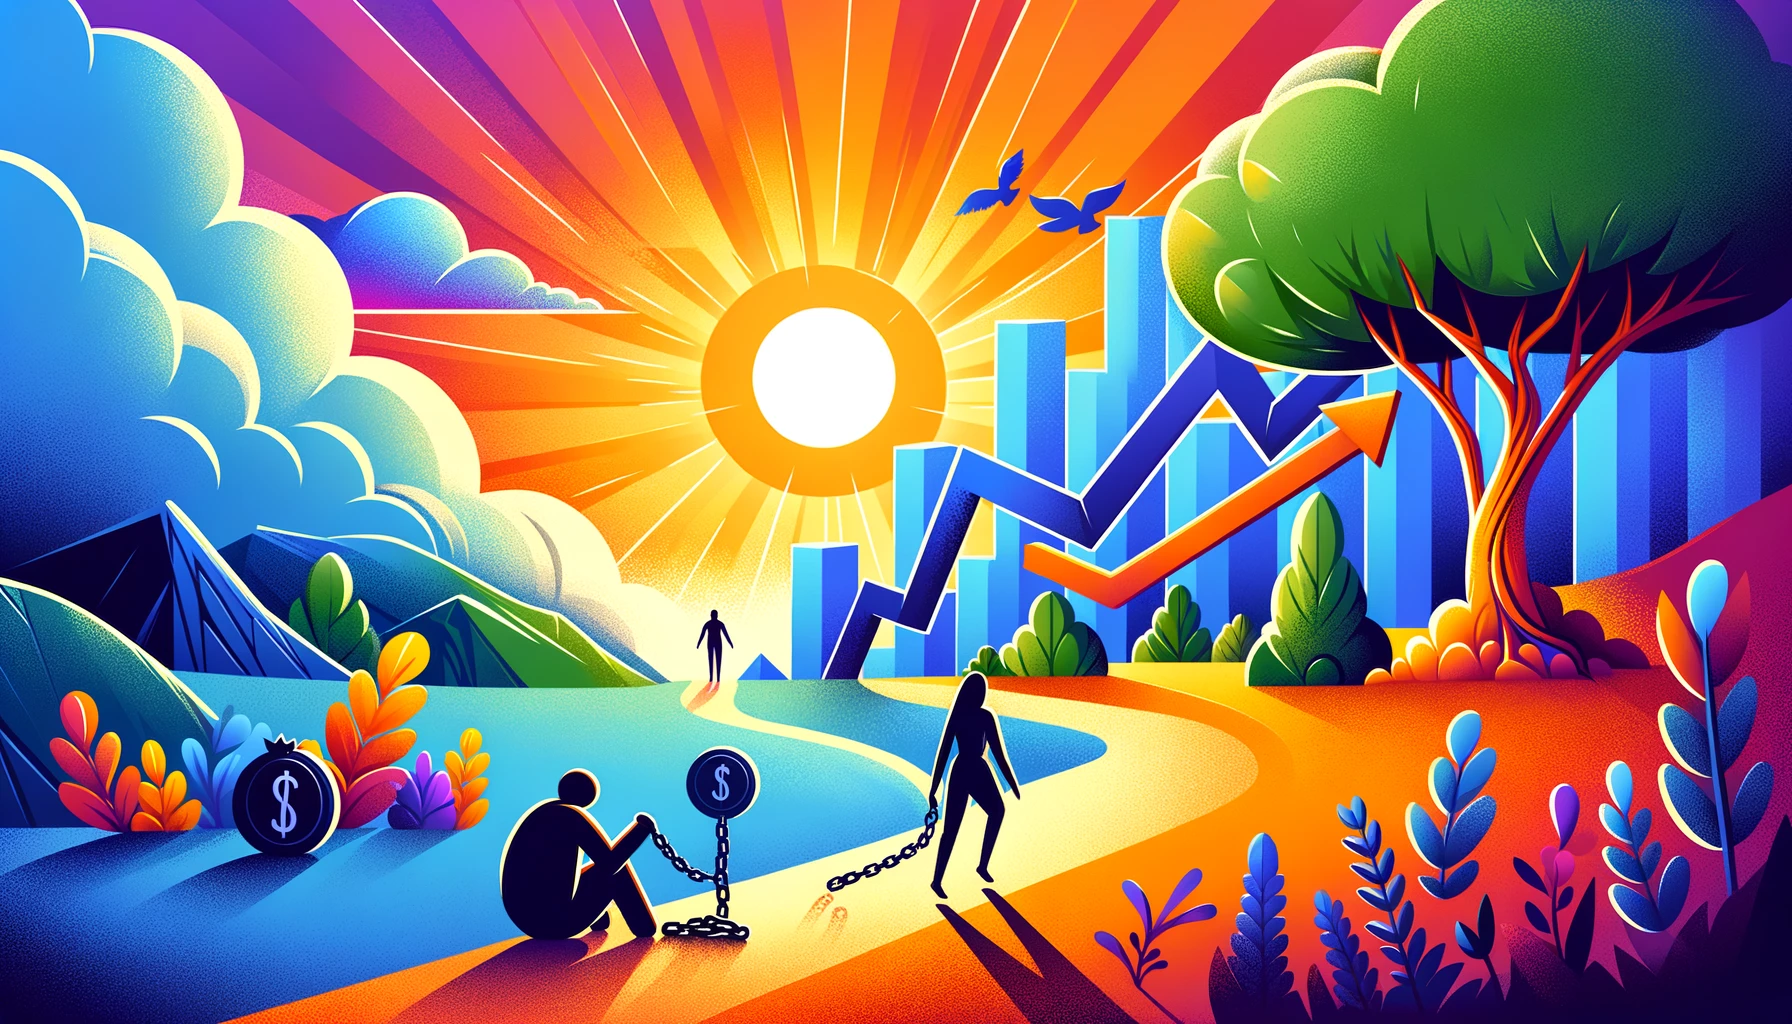 A vibrant illustration showing a person breaking free from the heavy chains of student loans, moving towards a bright, sunlit path symbolized by financial freedom and an upward trending credit score graph. The scene transitions from dark to light, embodying hope and progress.